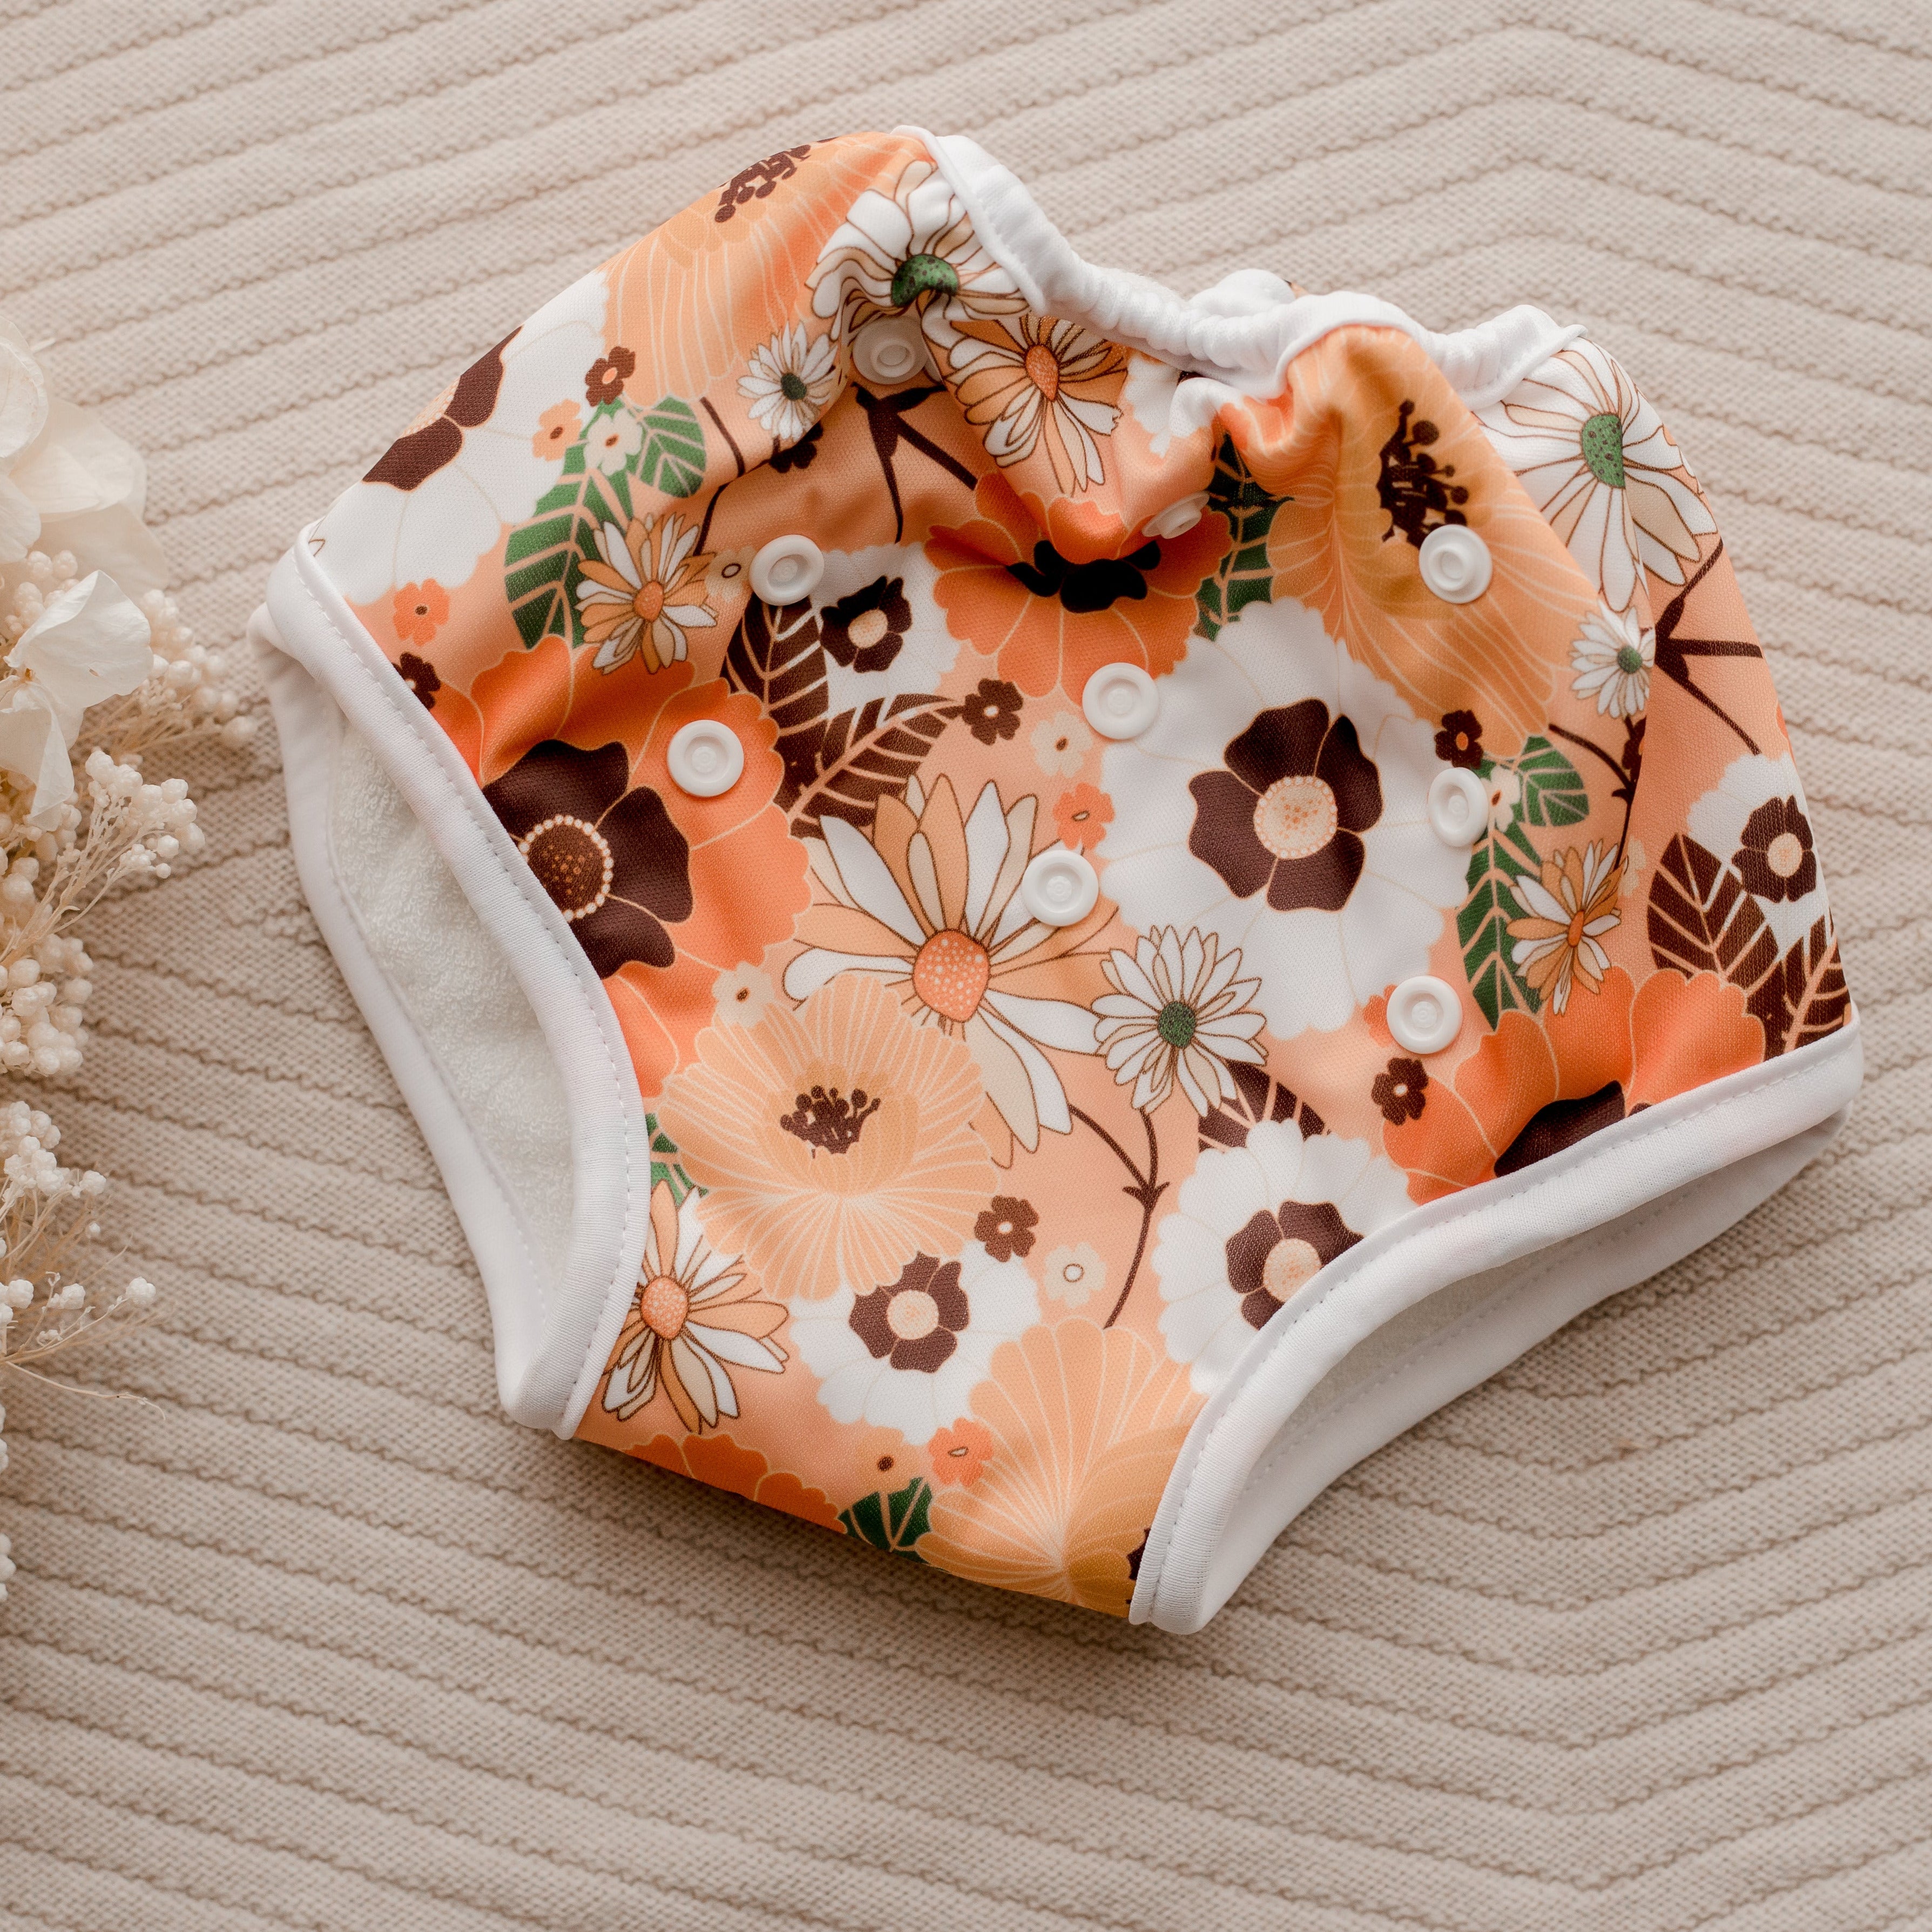 Show of hands! 🙋‍ Who's hopping to get started on potty training with Aldi  UK & Aldi Ireland today? Our award-winning reusable swim nappies & potty...  | By Bambino MioFacebook